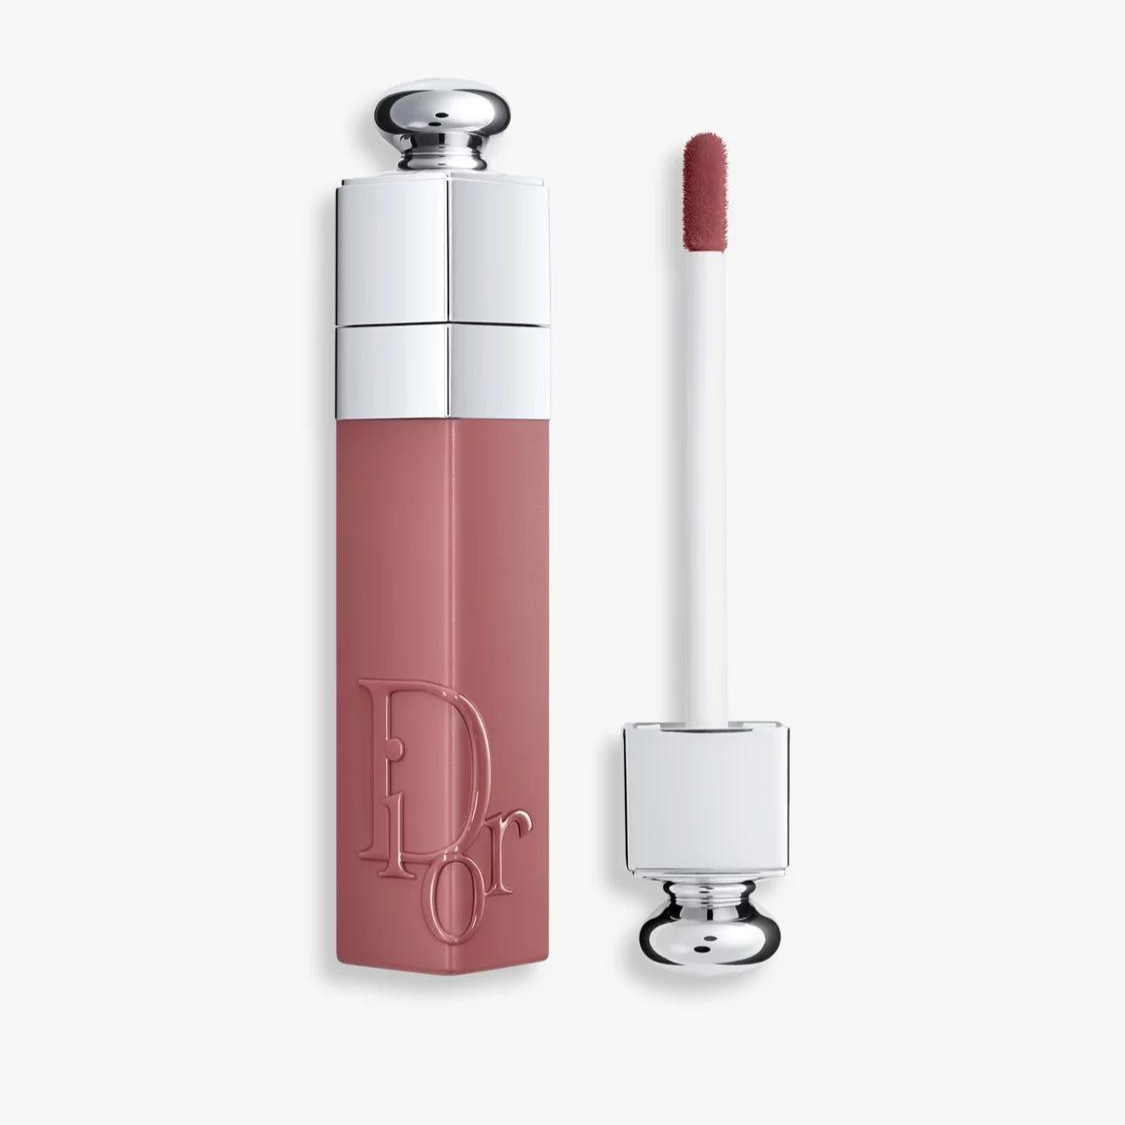 Lipstick in a deep pink shade on a white background. The lipstick can be used to create a soft goth look.